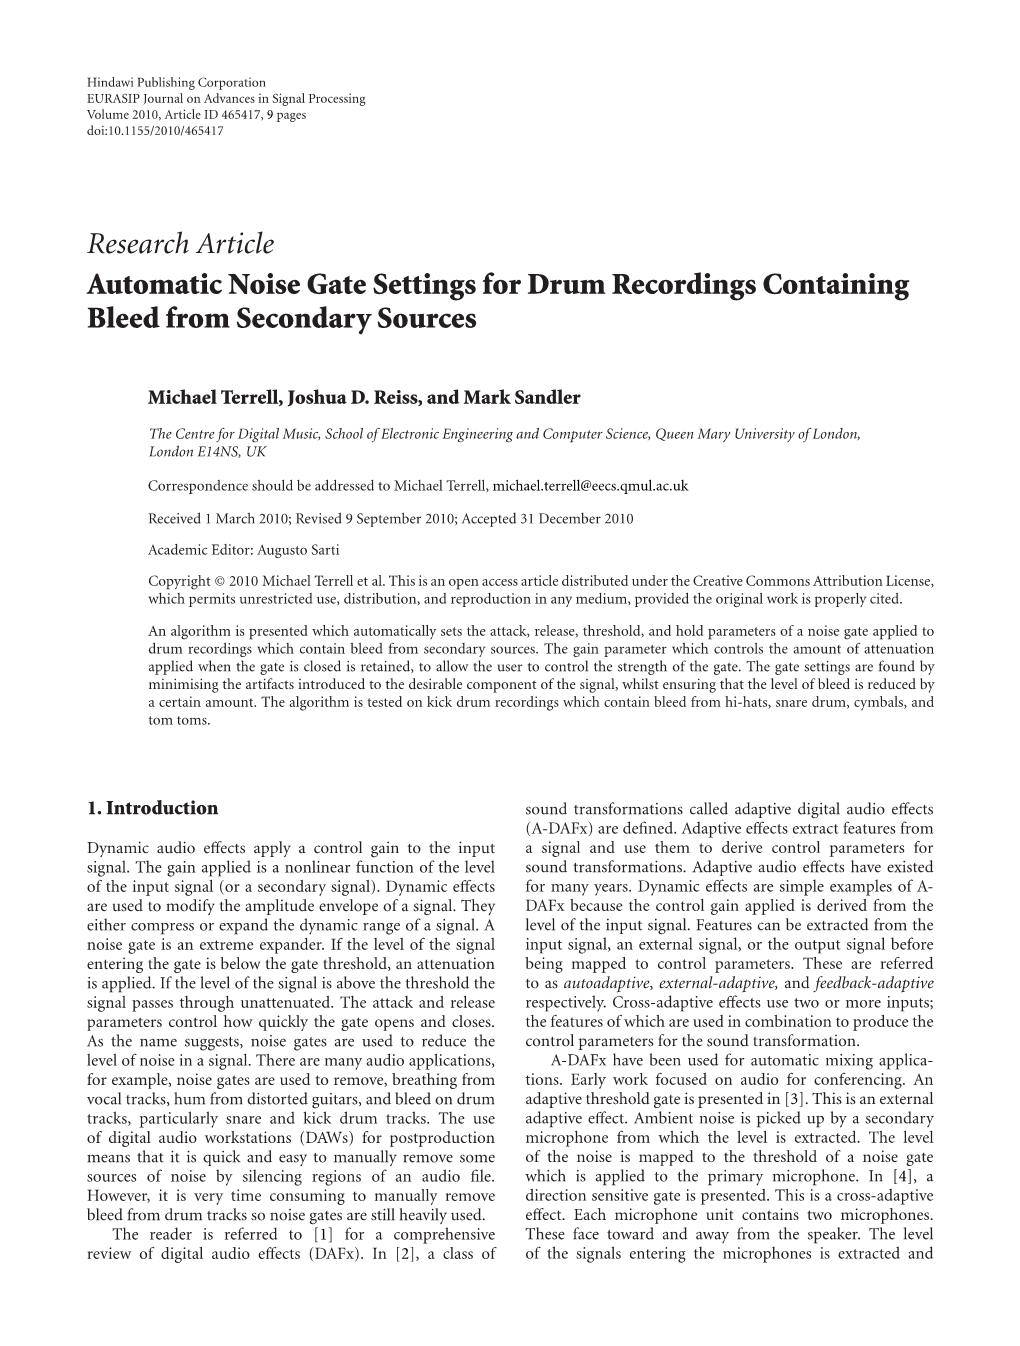 Automatic Noise Gate Settings for Drum Recordings Containing Bleed from Secondary Sources